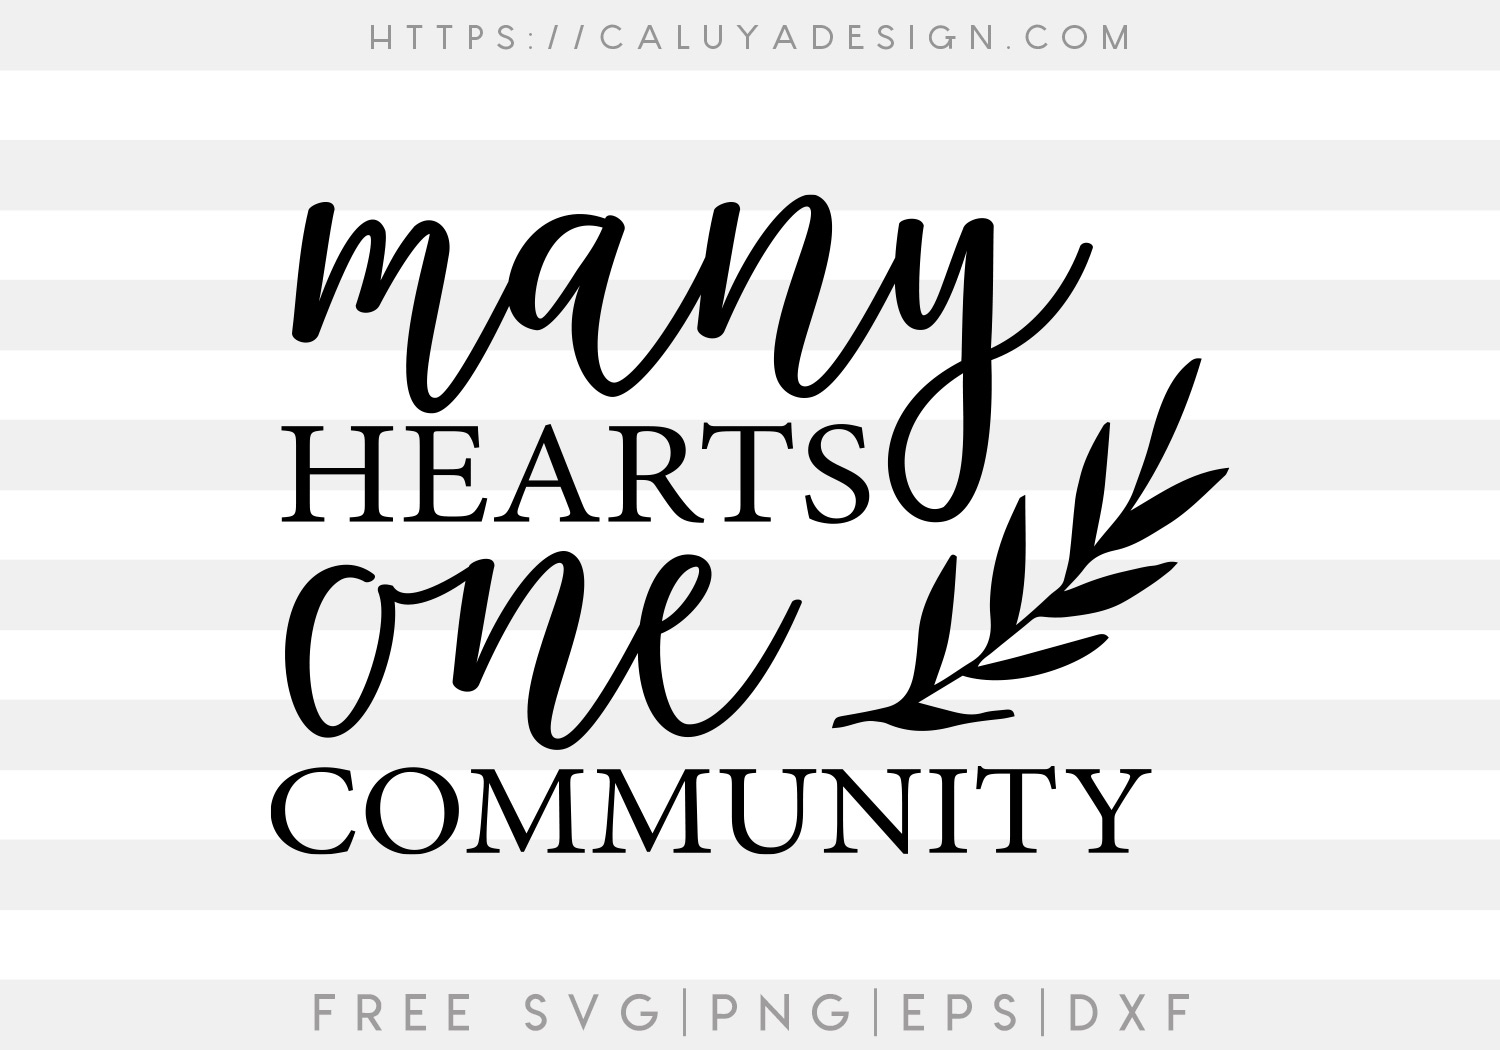 Many Hearts One Community SVG, PNG, EPS & DXF